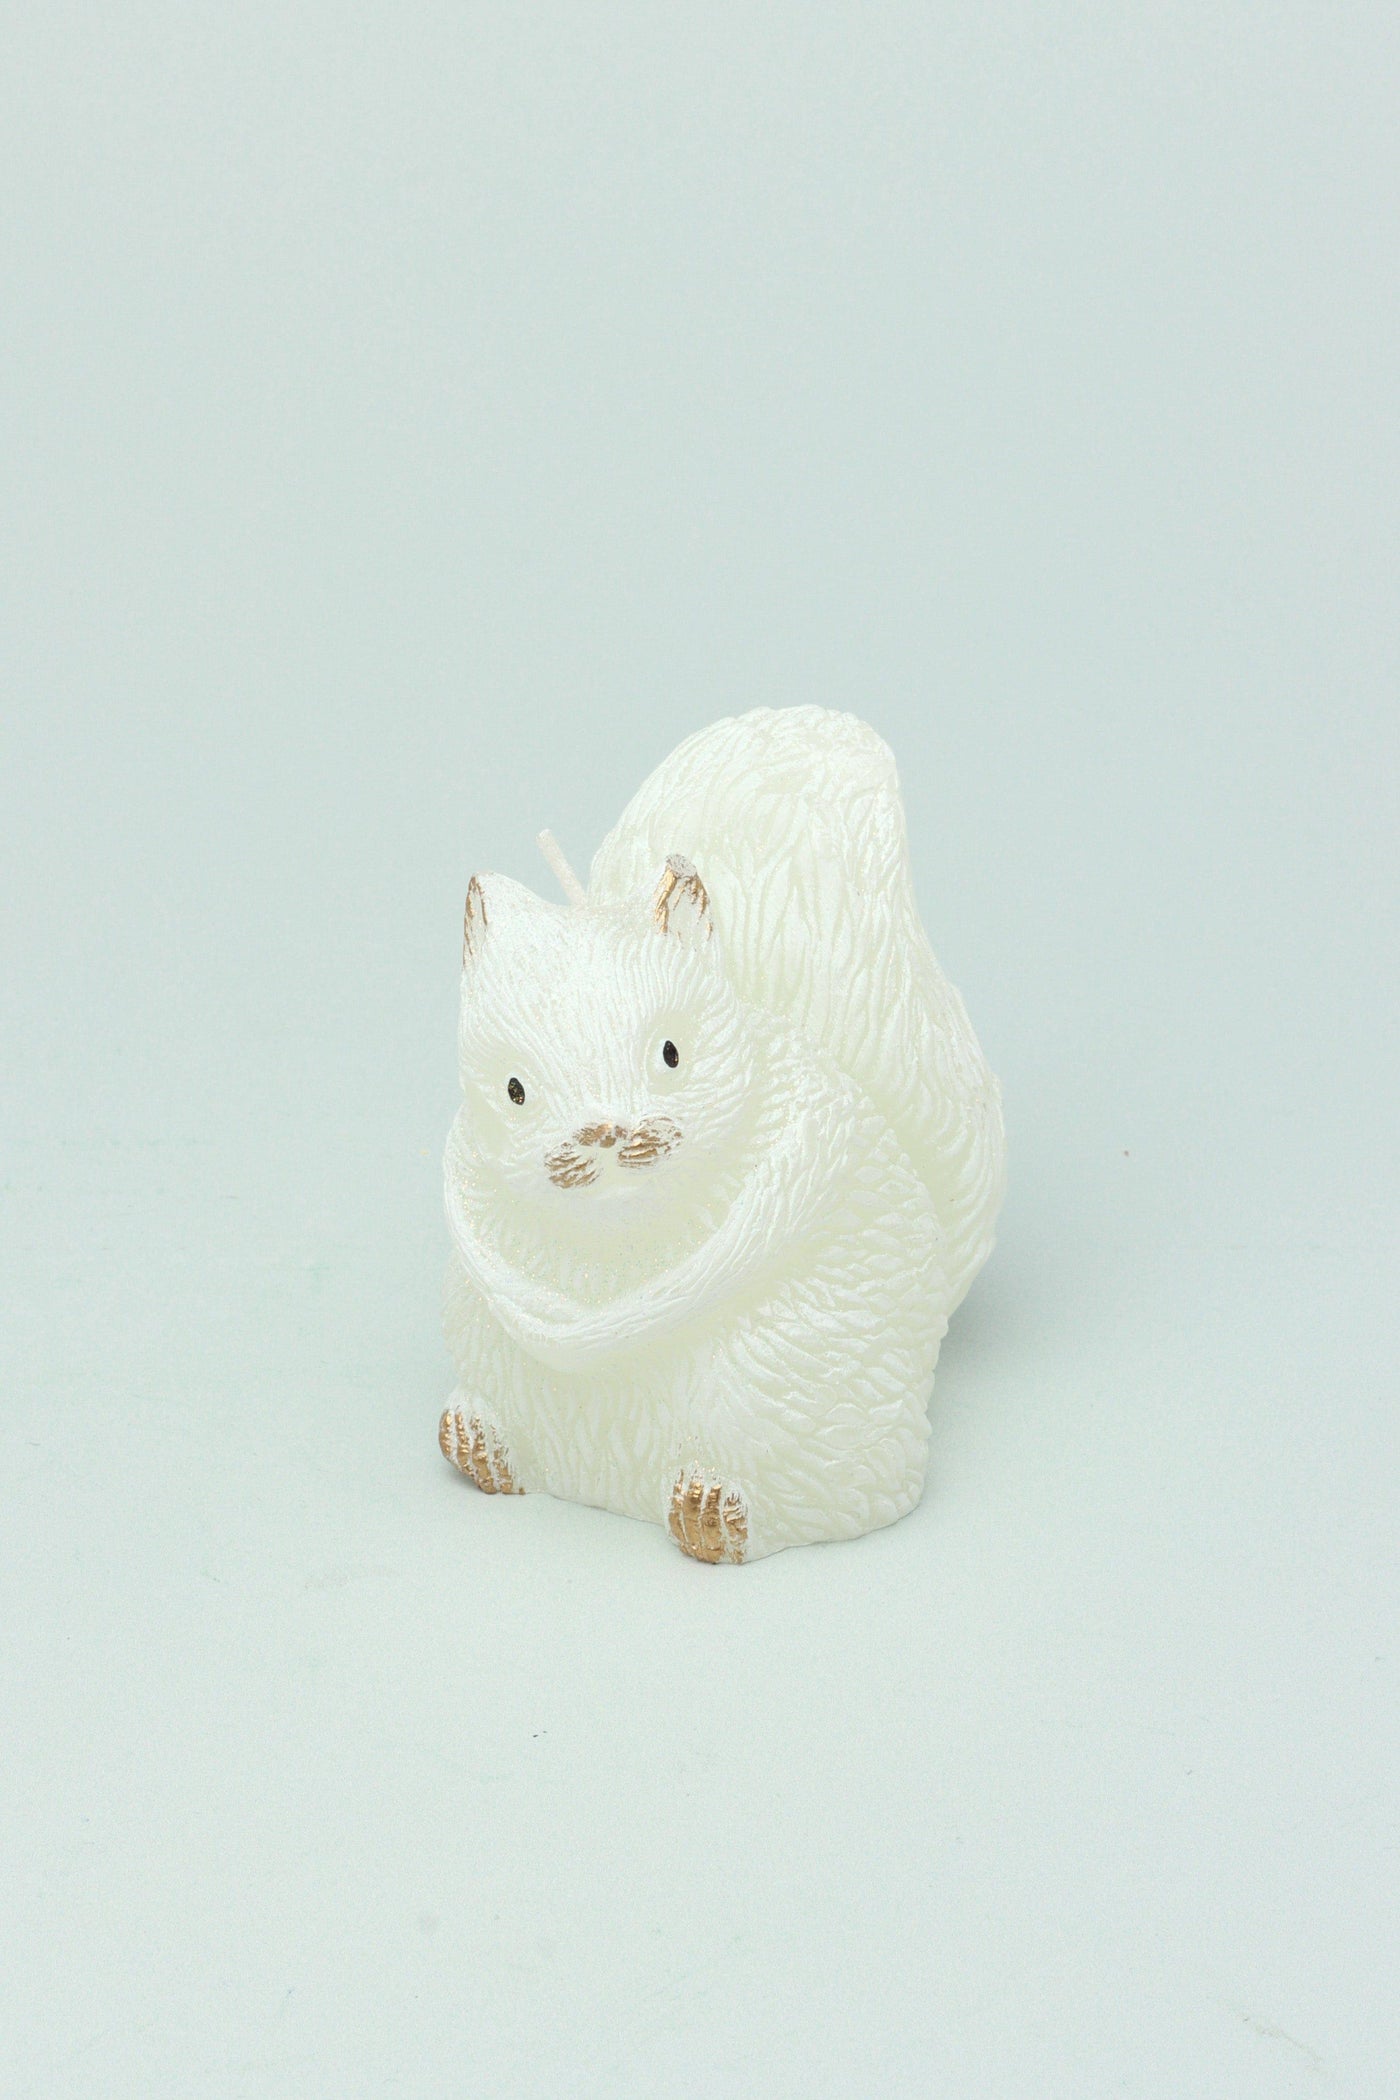 G Decor Candles White / Squirrel Forest Creatures White Glitter Realistic Animals Birds Cute Festive 3D Candle